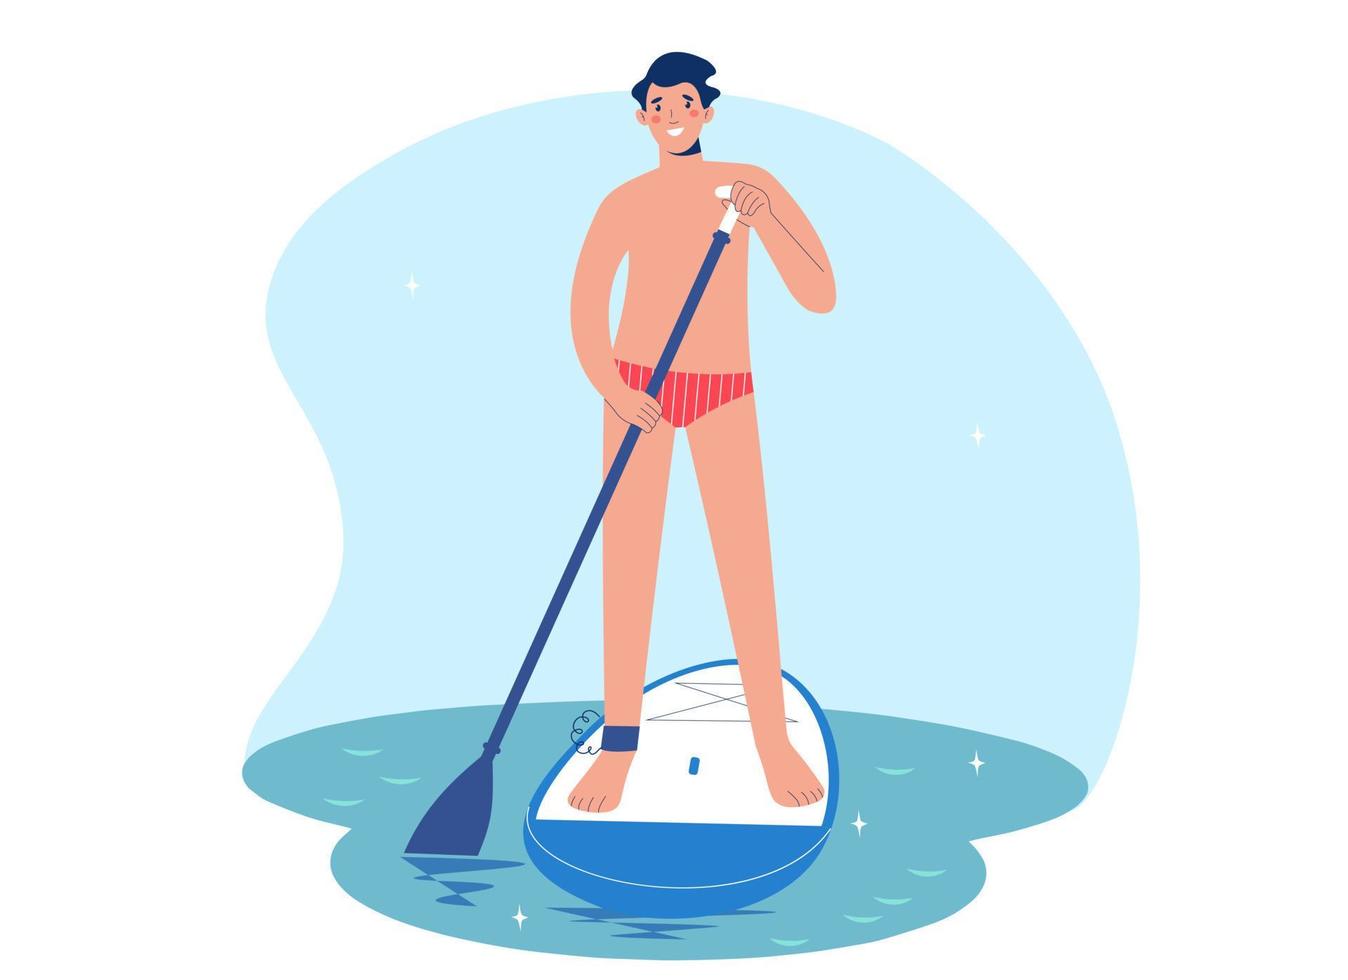 Standing man is paddling with paddle board on water. Man in water on sup board. SUP surfing concept vector